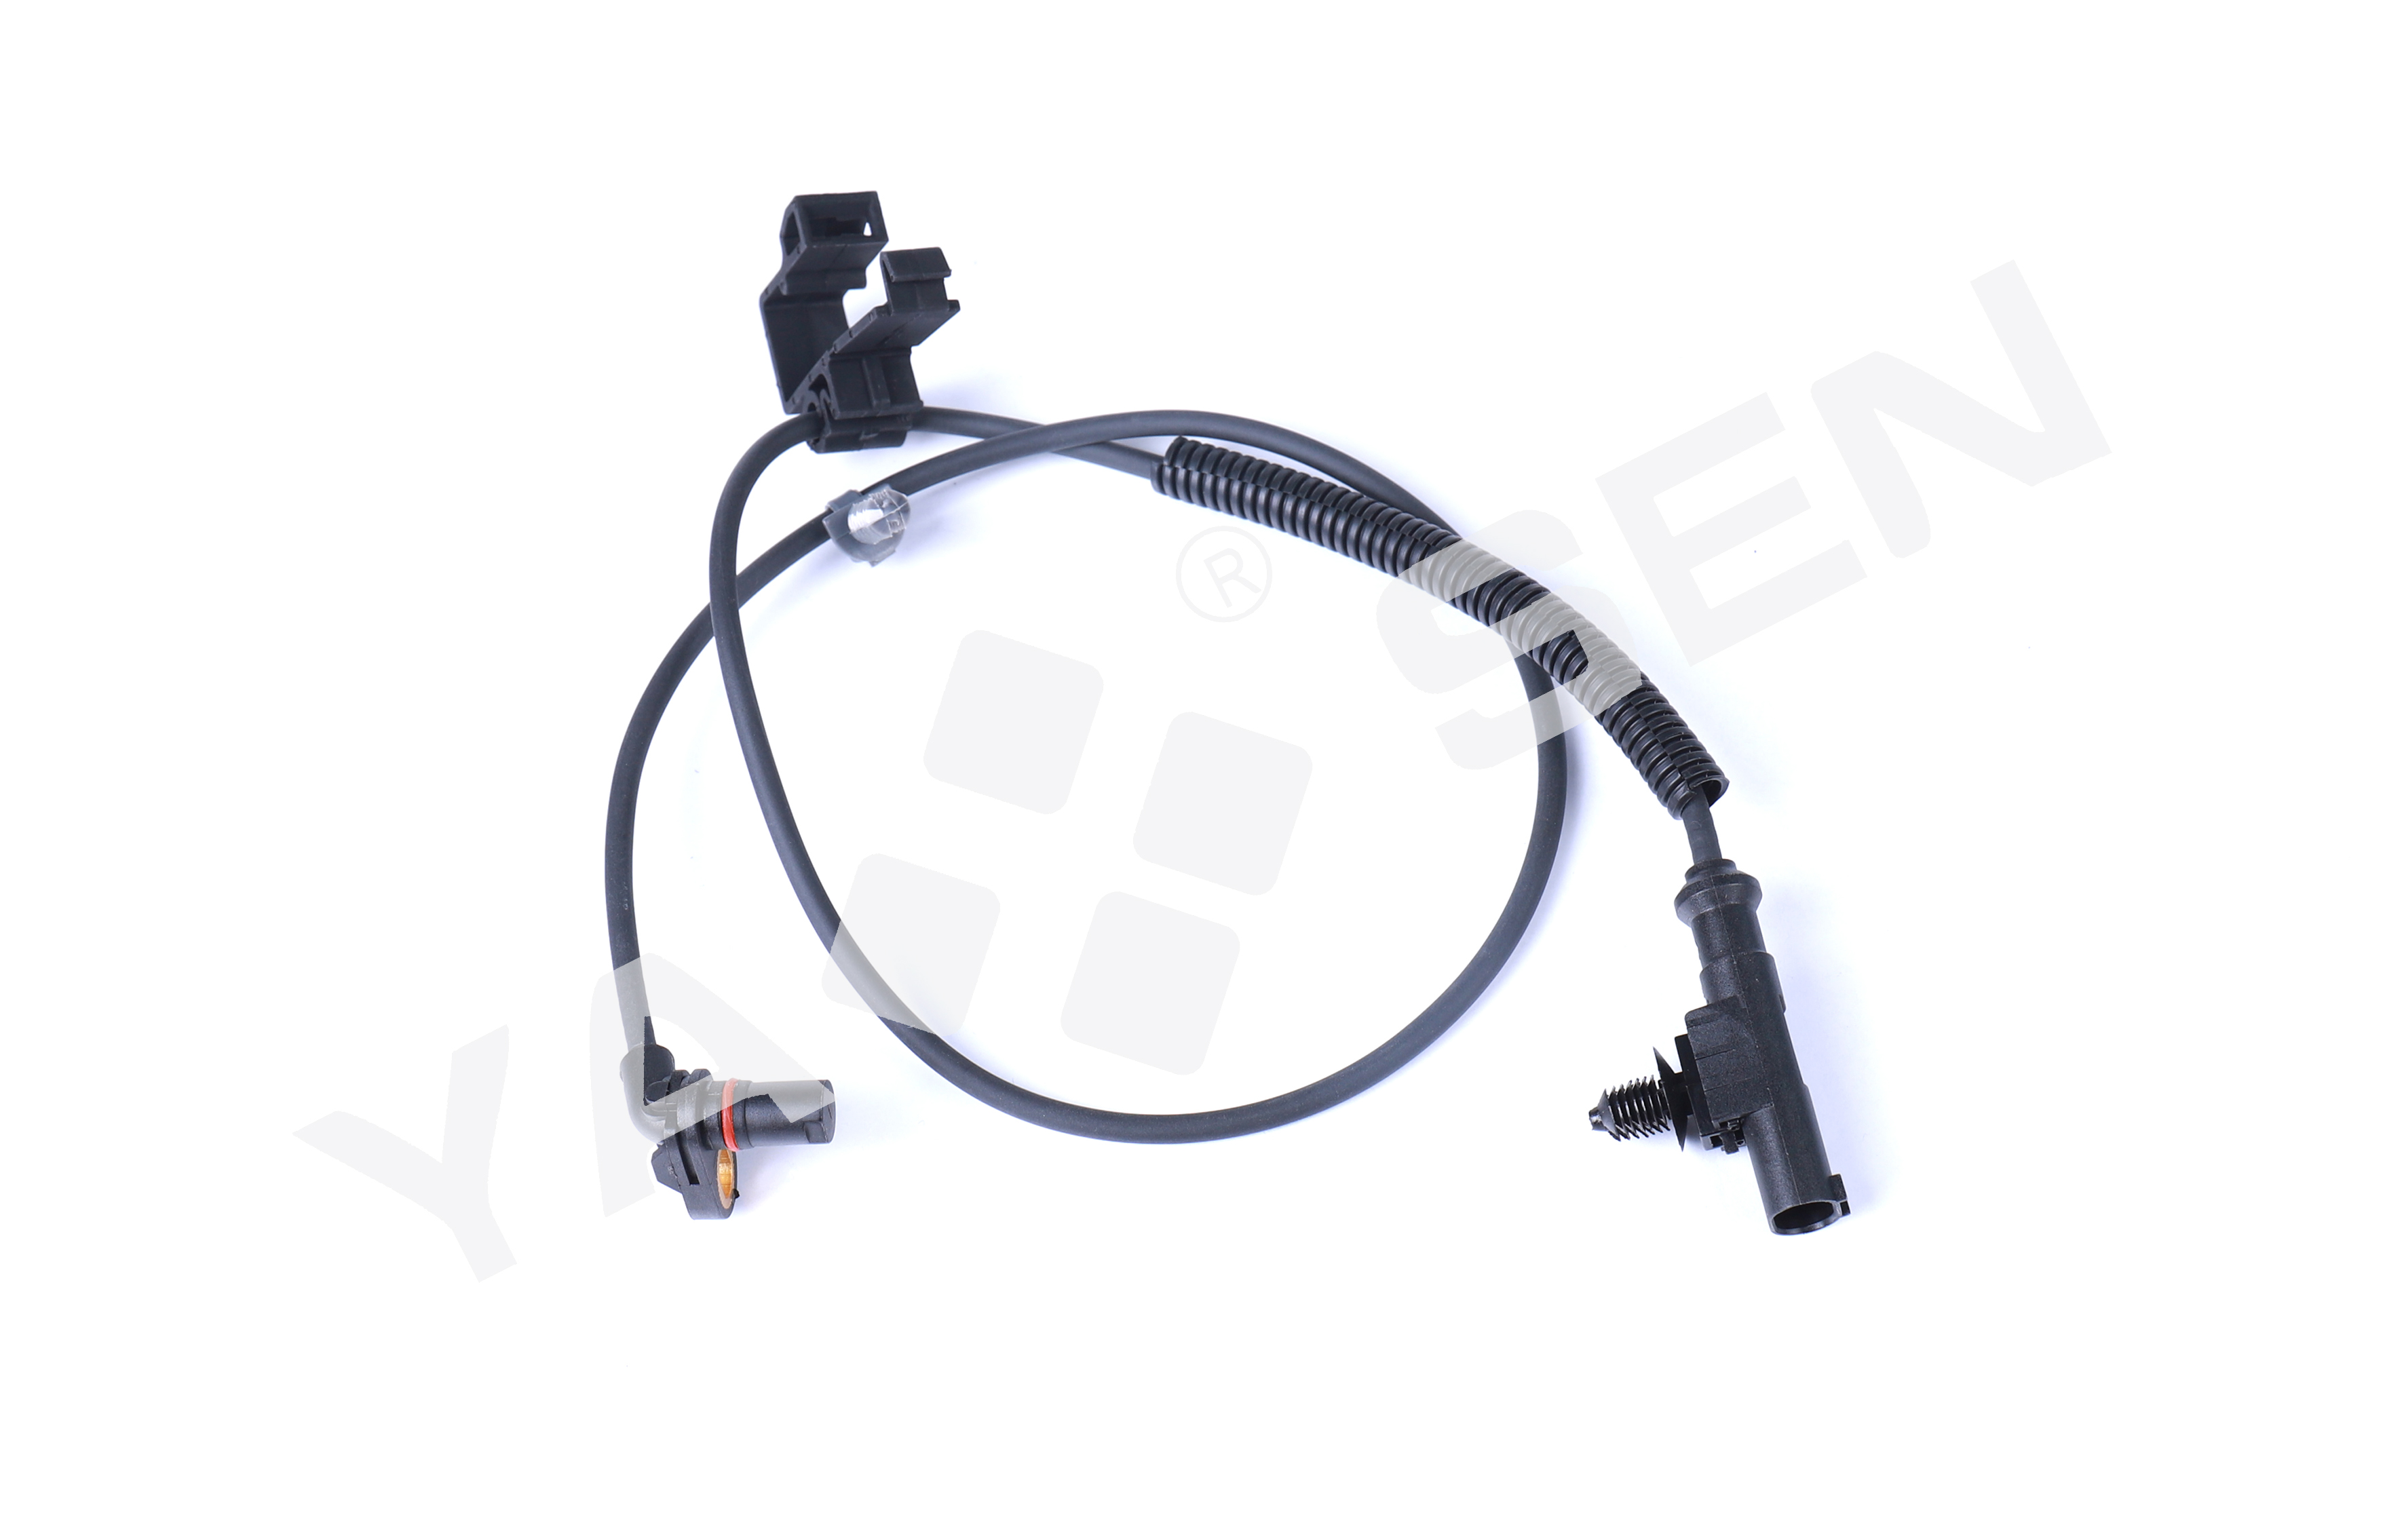 ABS Wheel Speed Sensor for FORD/DODGE 5S7050 72-6137 SU8542 ABS369 5142770AA ALS259